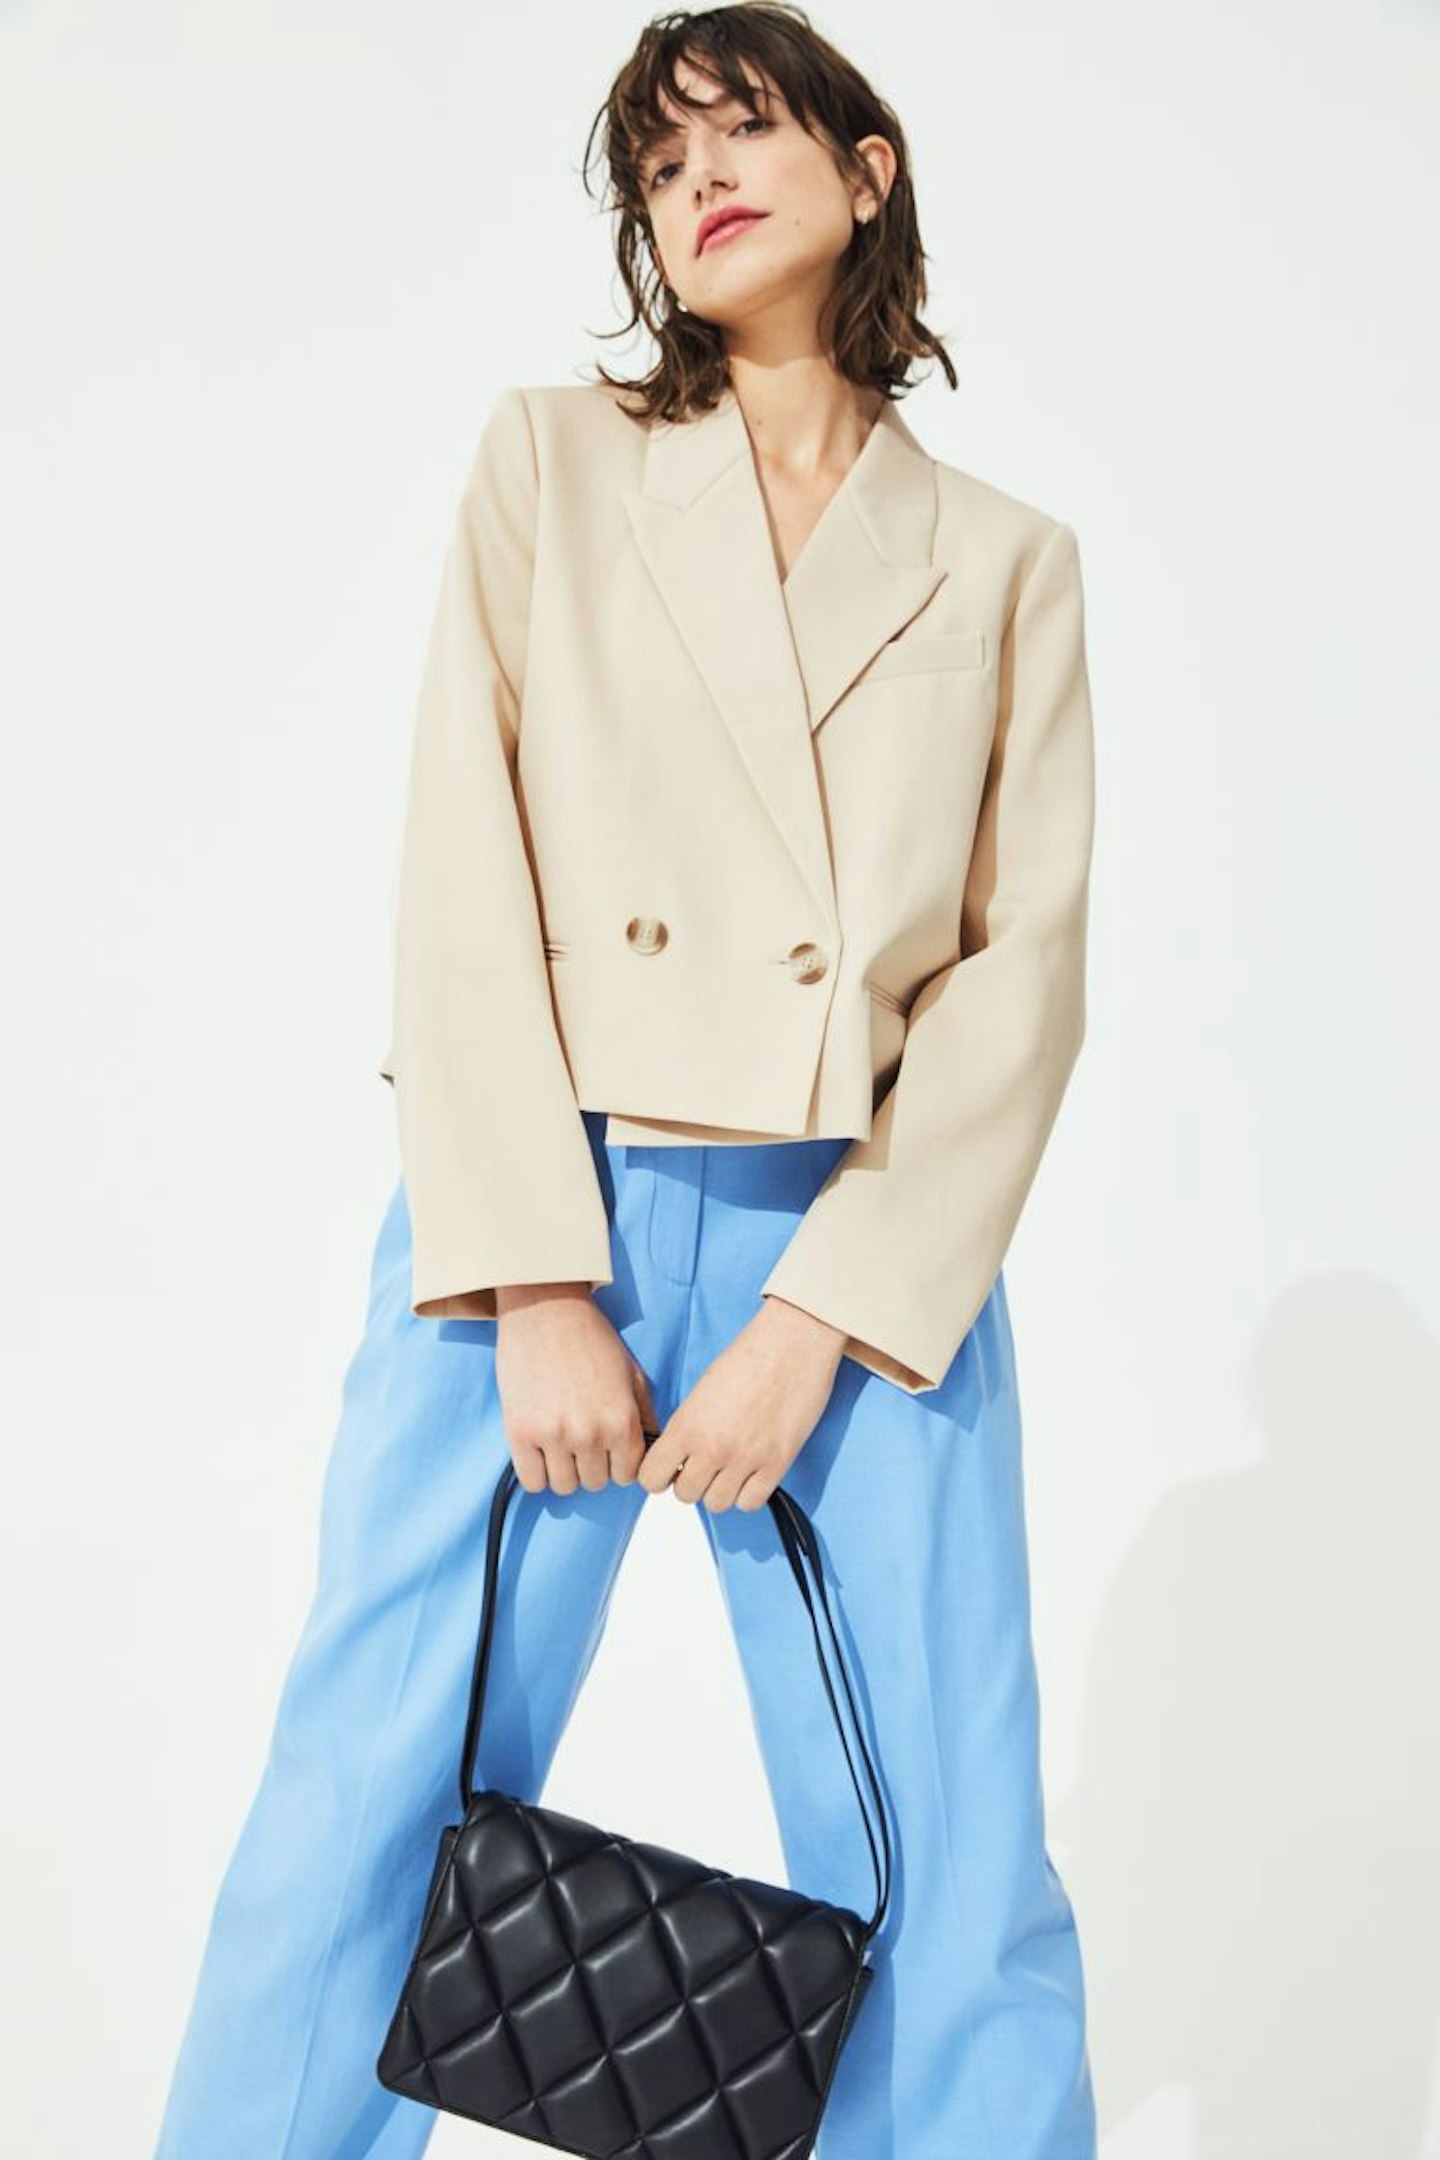 Tuesday – H&M, Cropped Jacket, £24.99